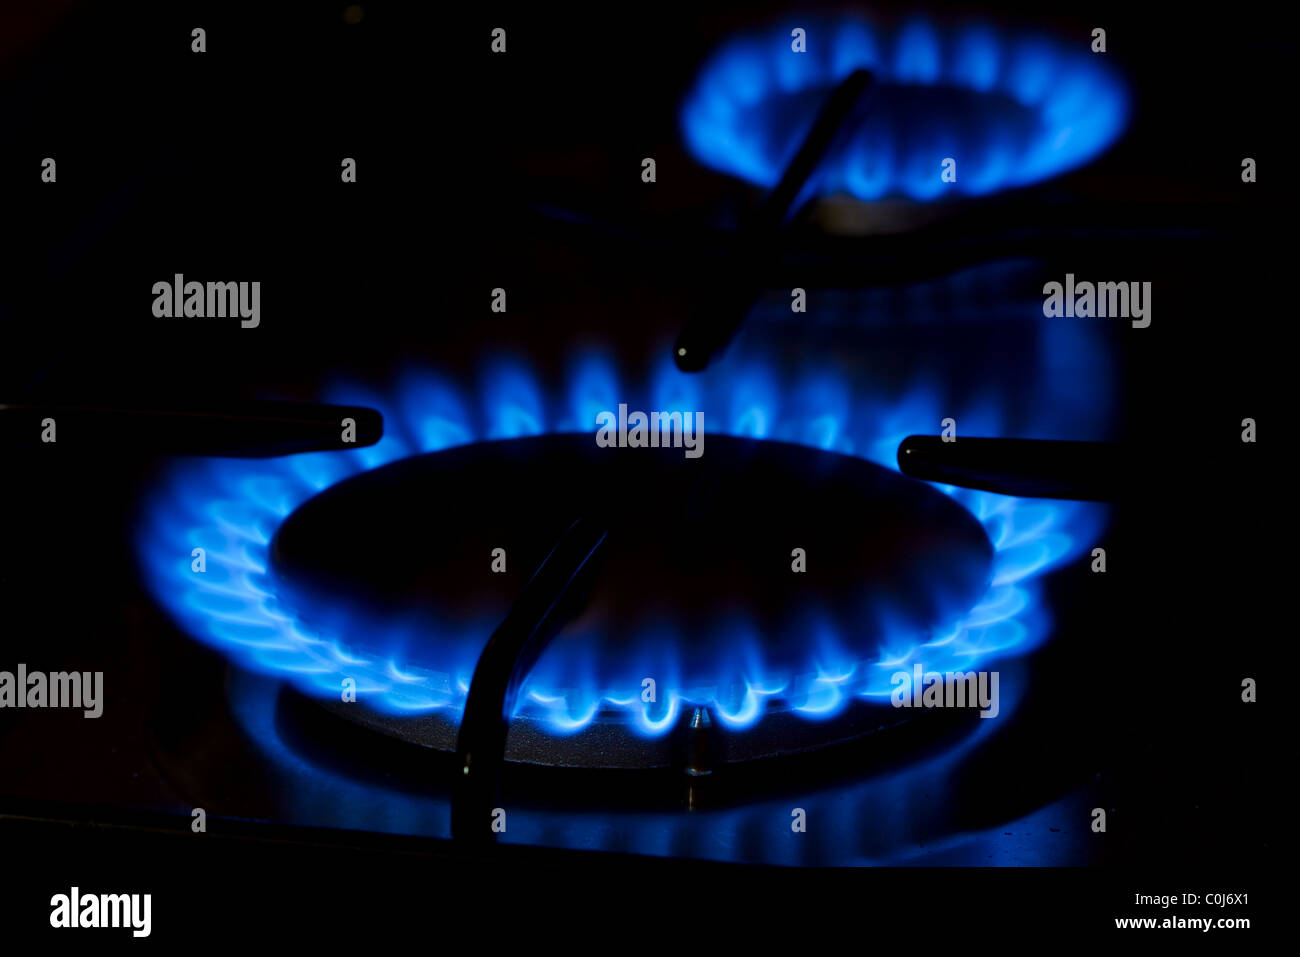 Blue gas flame of on oven in the dark Stock Photo